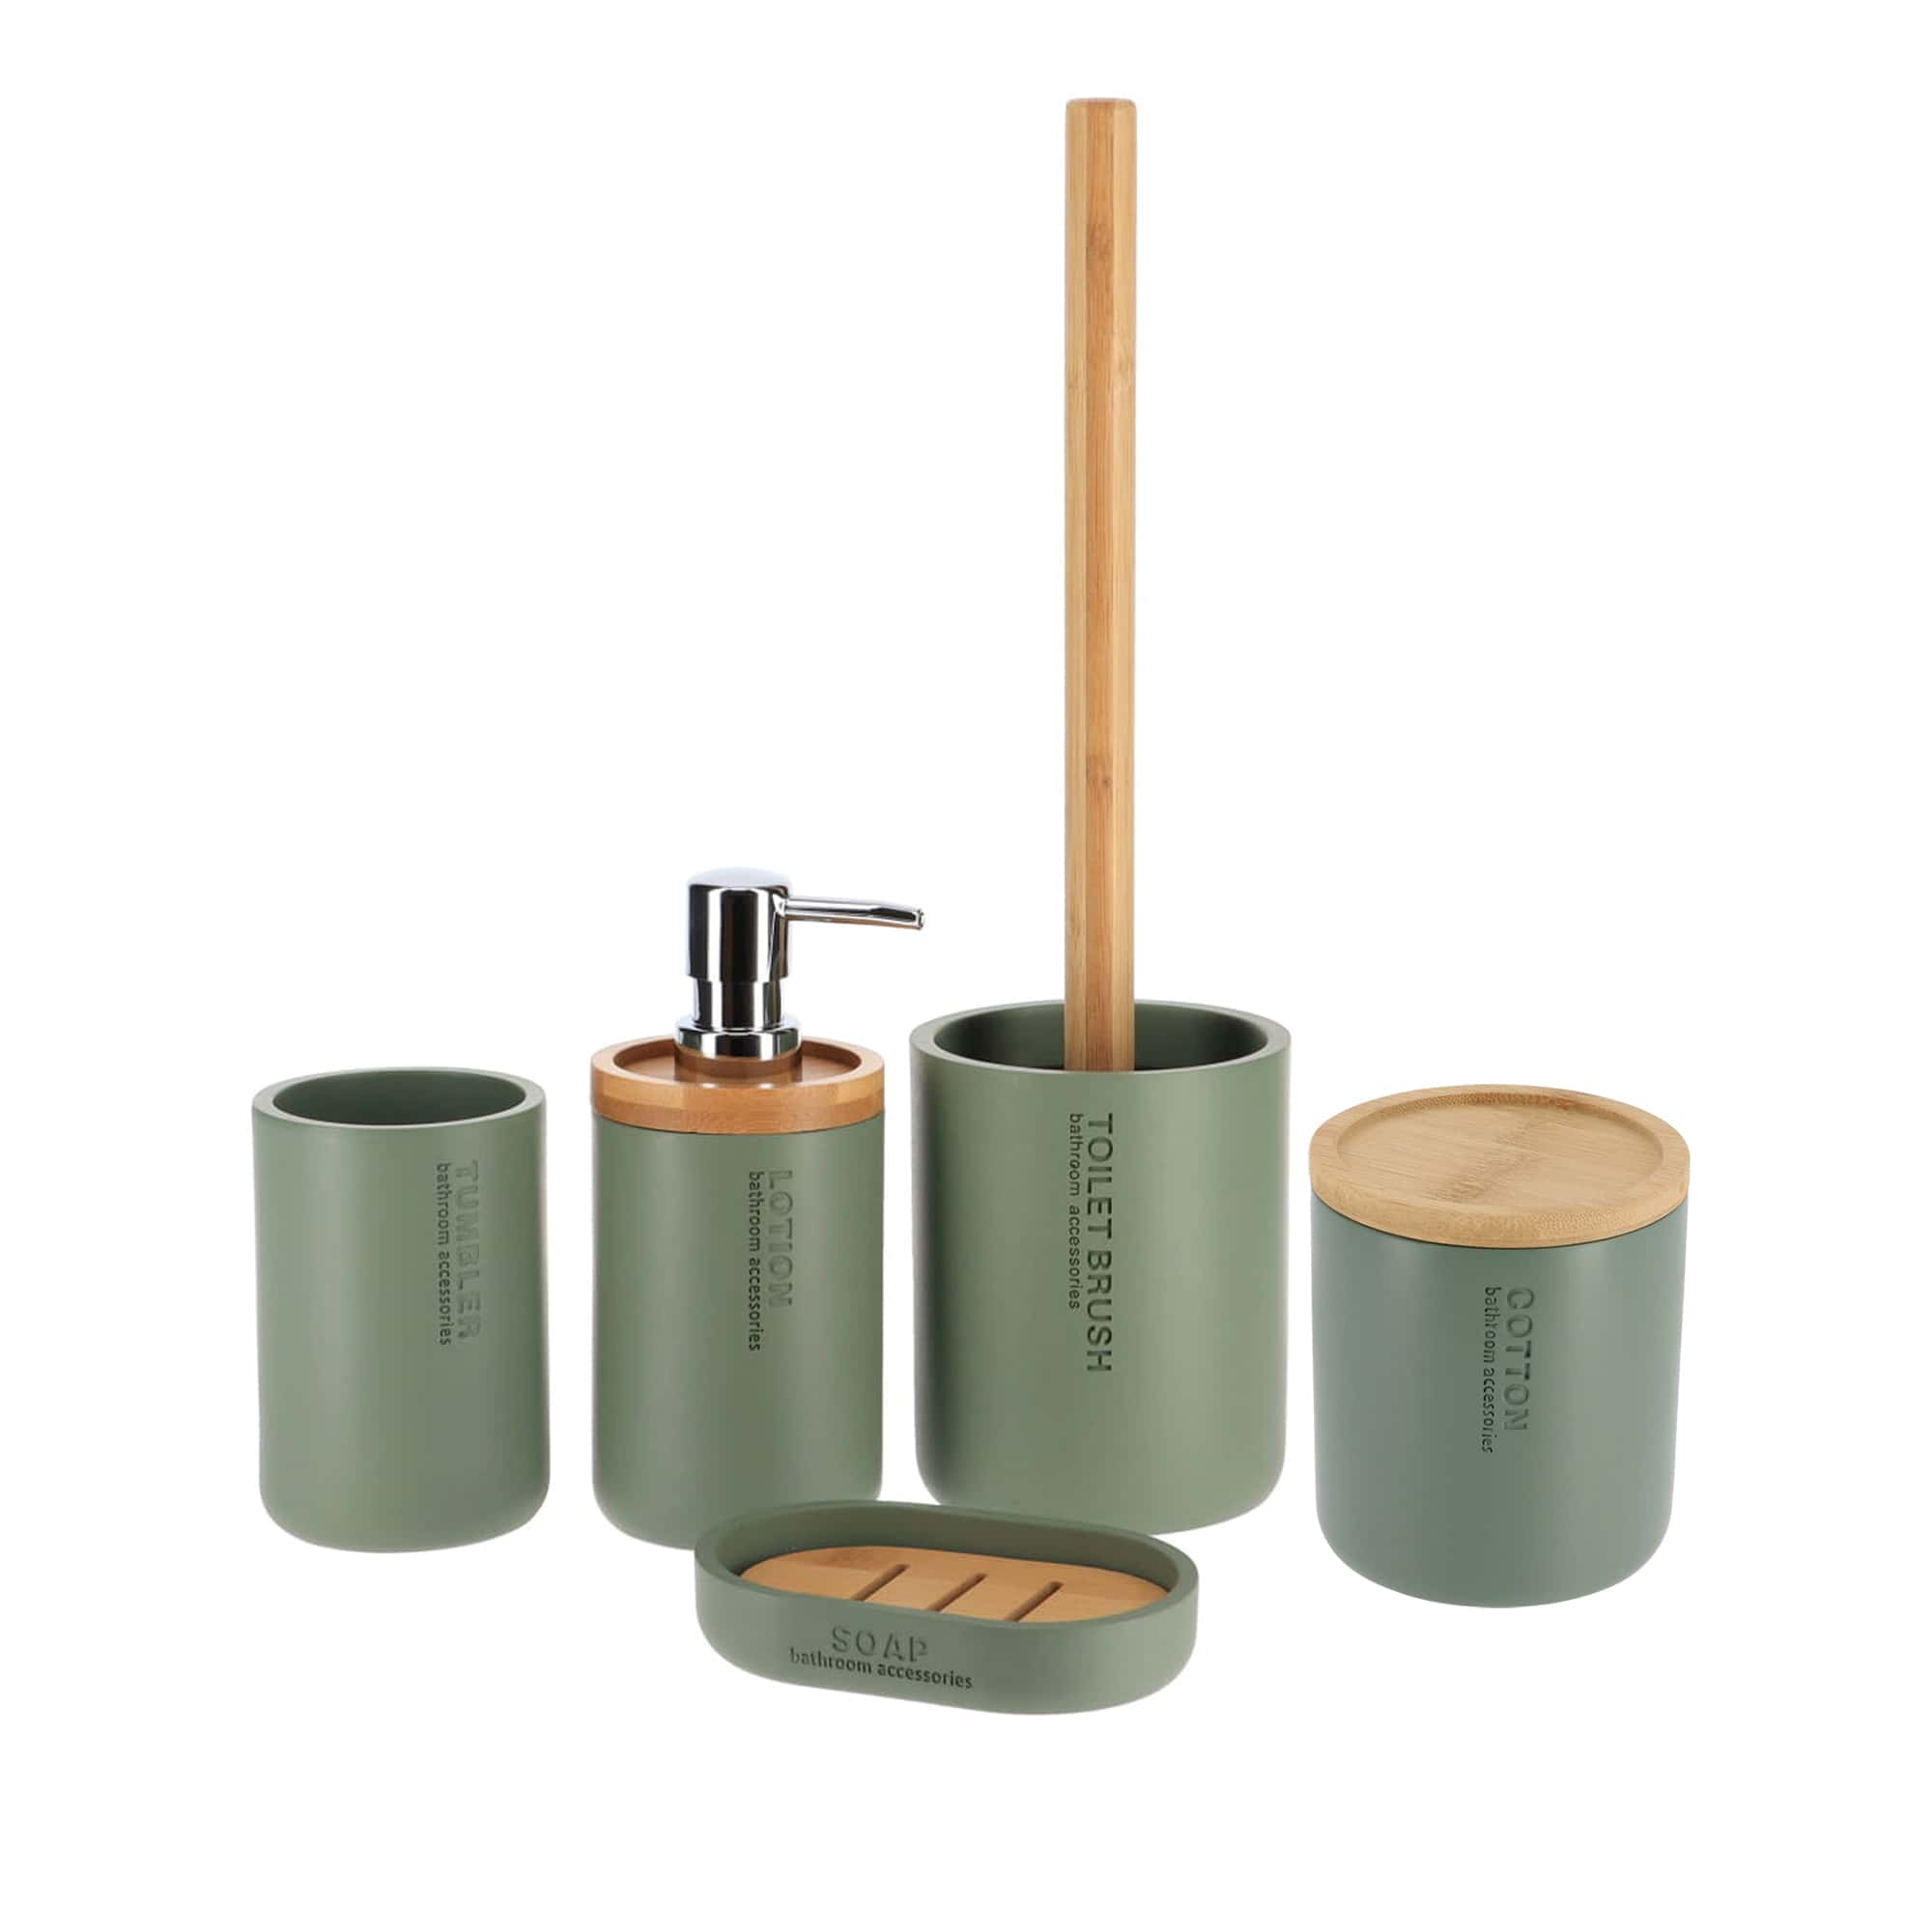 Sleek Green Bathroom Accessory Set with Bamboo Accents 5 pieces Toothbrush Cup, Soap Dispenser, Toilet Brush, Cotton Jar and Soap Dish